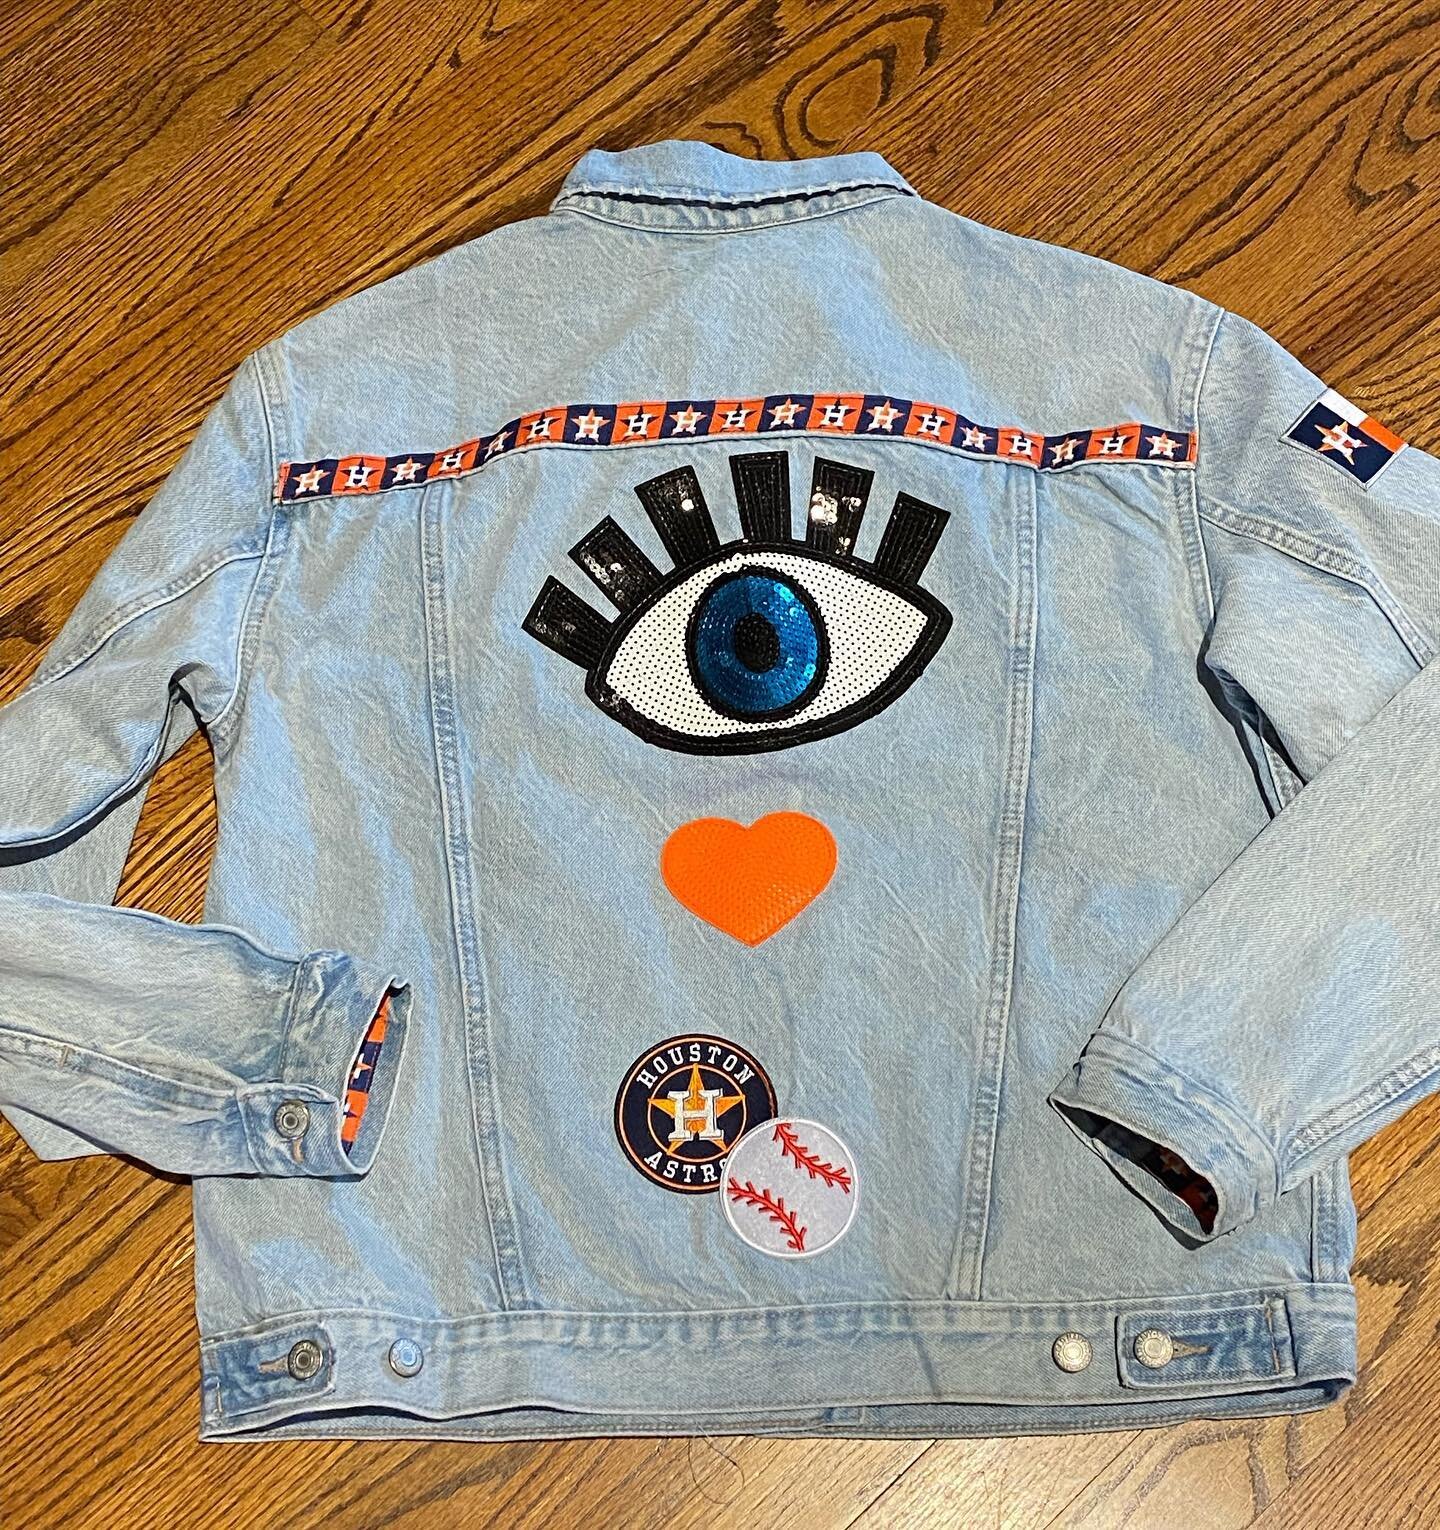 Say it out loud with us: 👁🧡⚾️
For sale: $289 medium boyfriend-cut